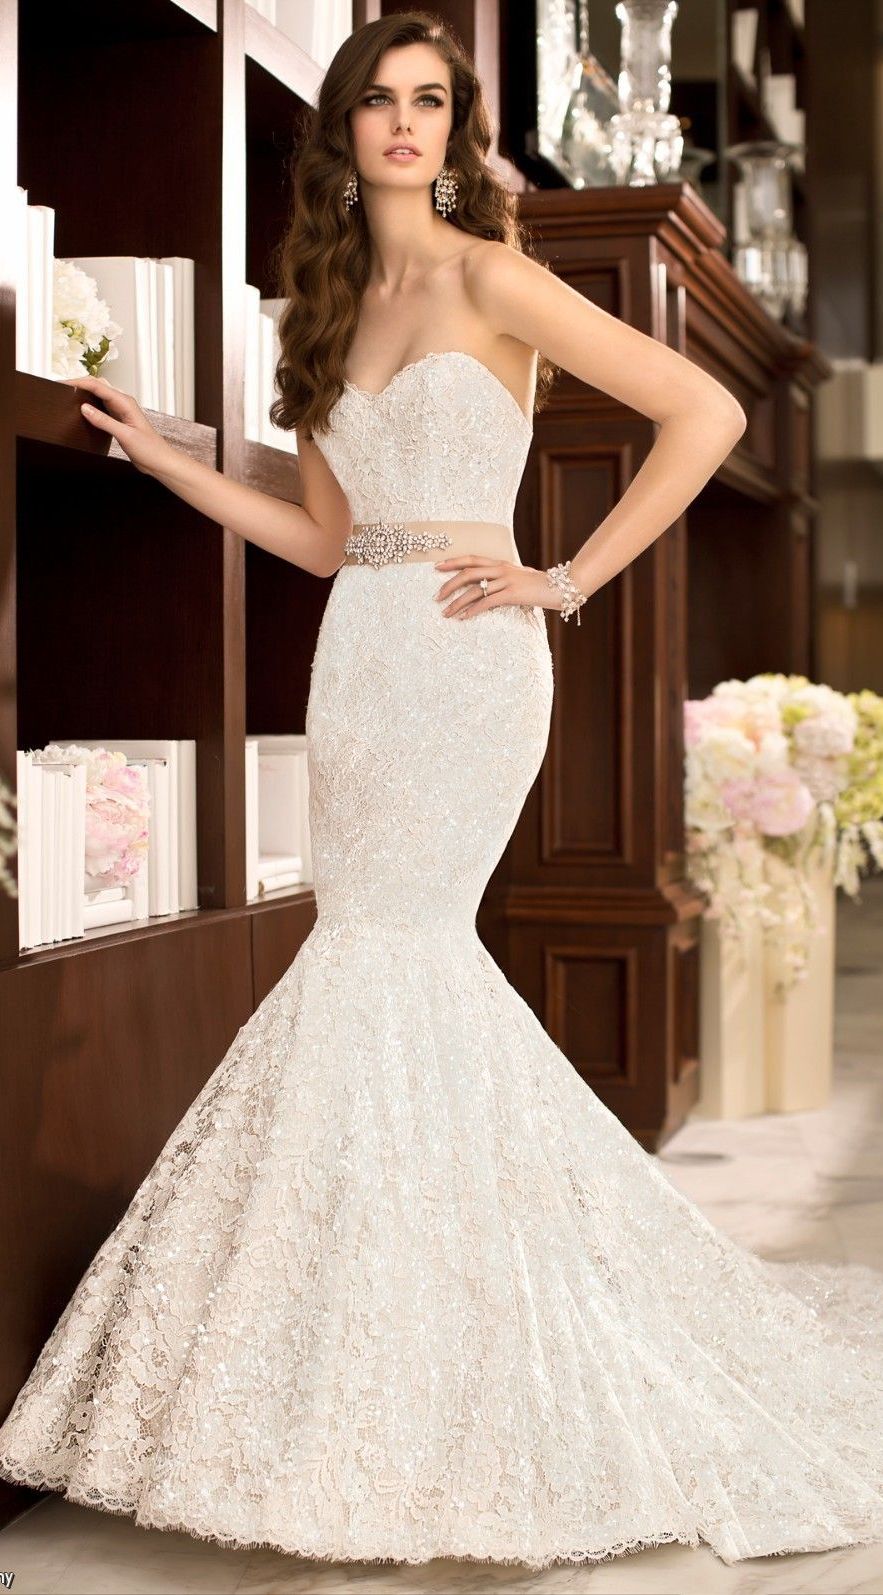 Lace Mermaid Wedding Dress with Bling